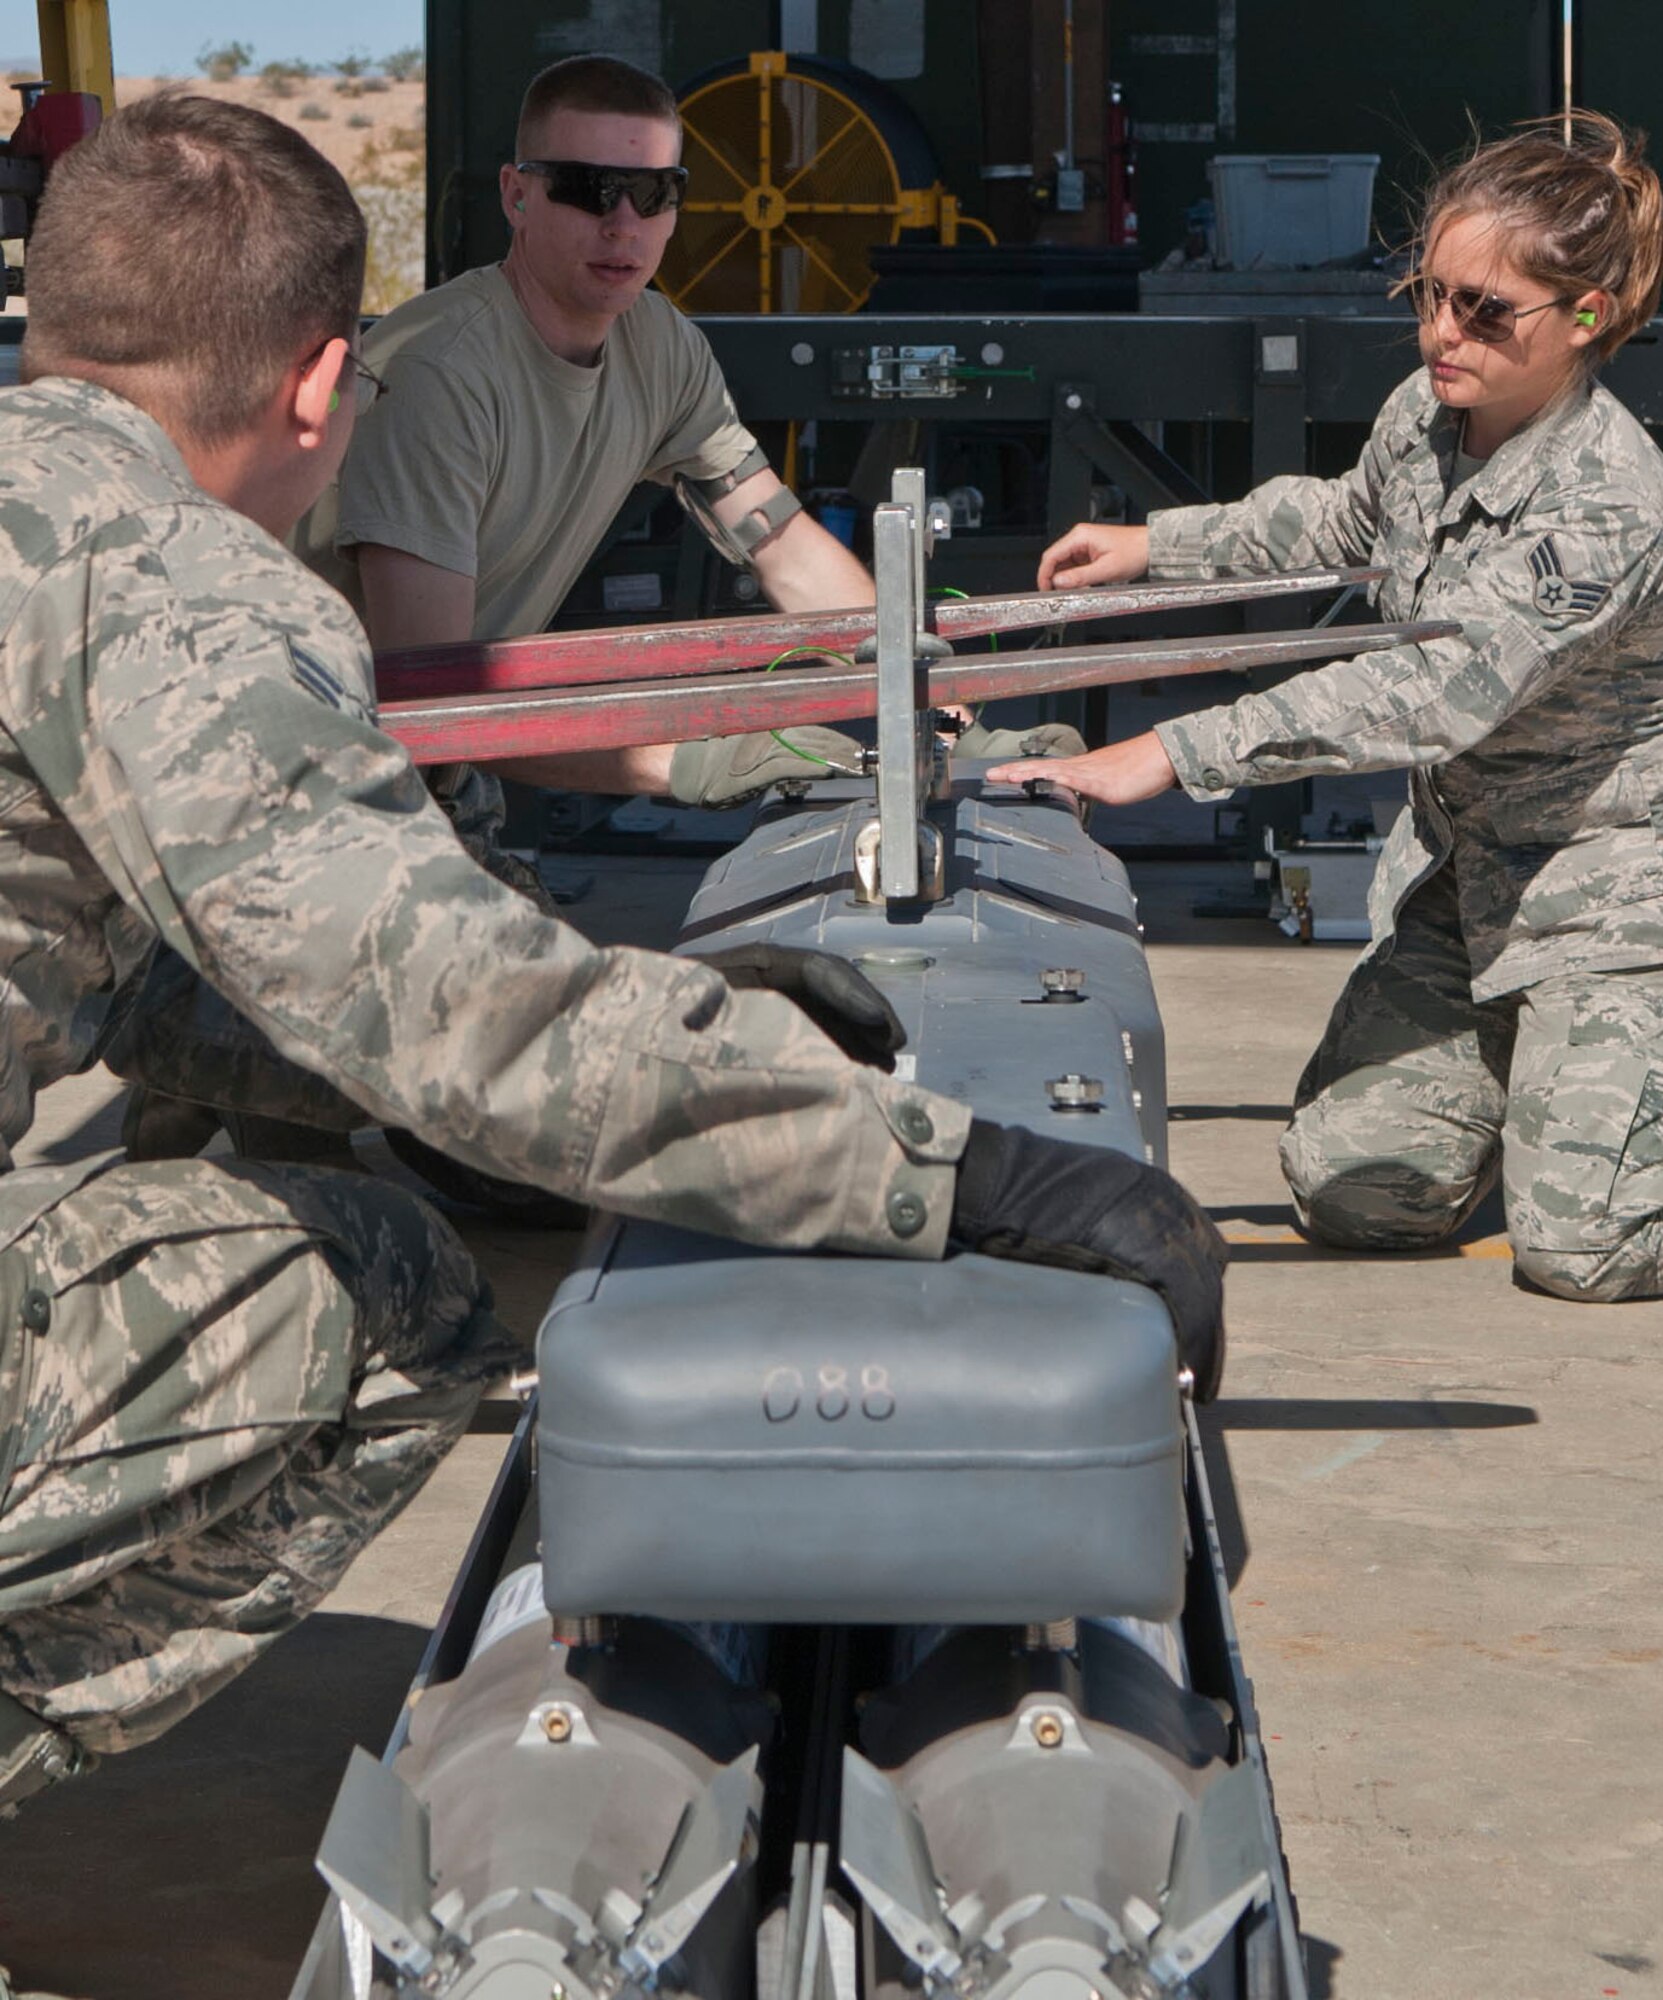 Airmen prepare a BRU-61 bomb rack at the munitions storage area on Nellis Air Force Base, Nev., March 5, 2015. Completed rounds are loaded onto trailers, or mods, and delivered to the flightline for line delivery. (U.S. Air Force photo by Airman 1st Class Mikaley Towle)